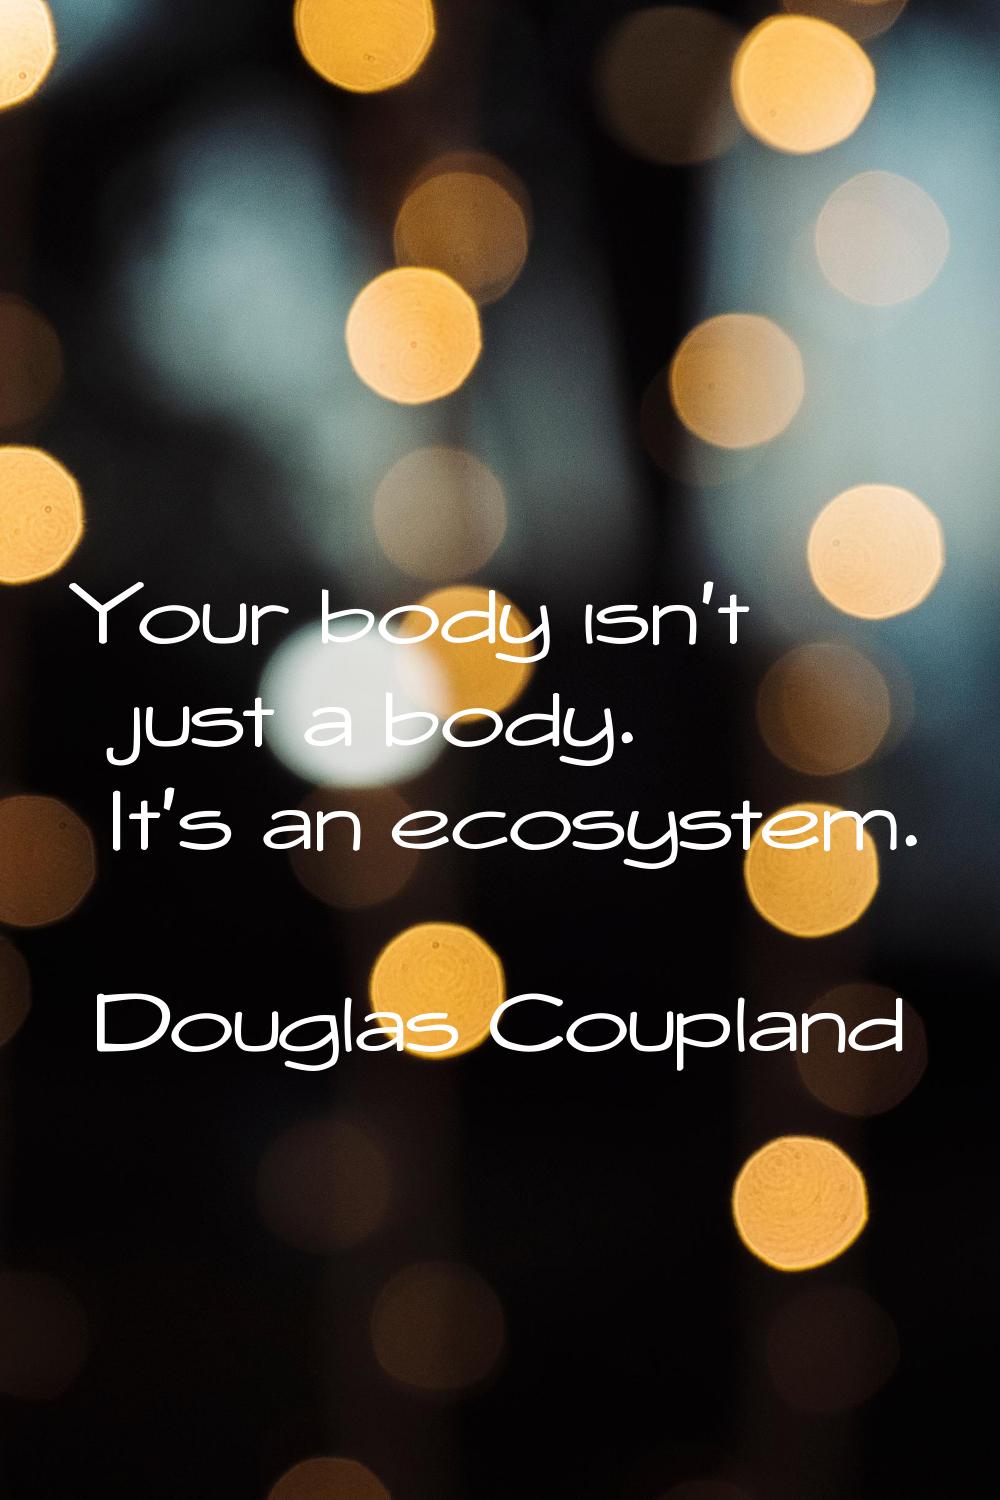 Your body isn't just a body. It's an ecosystem.